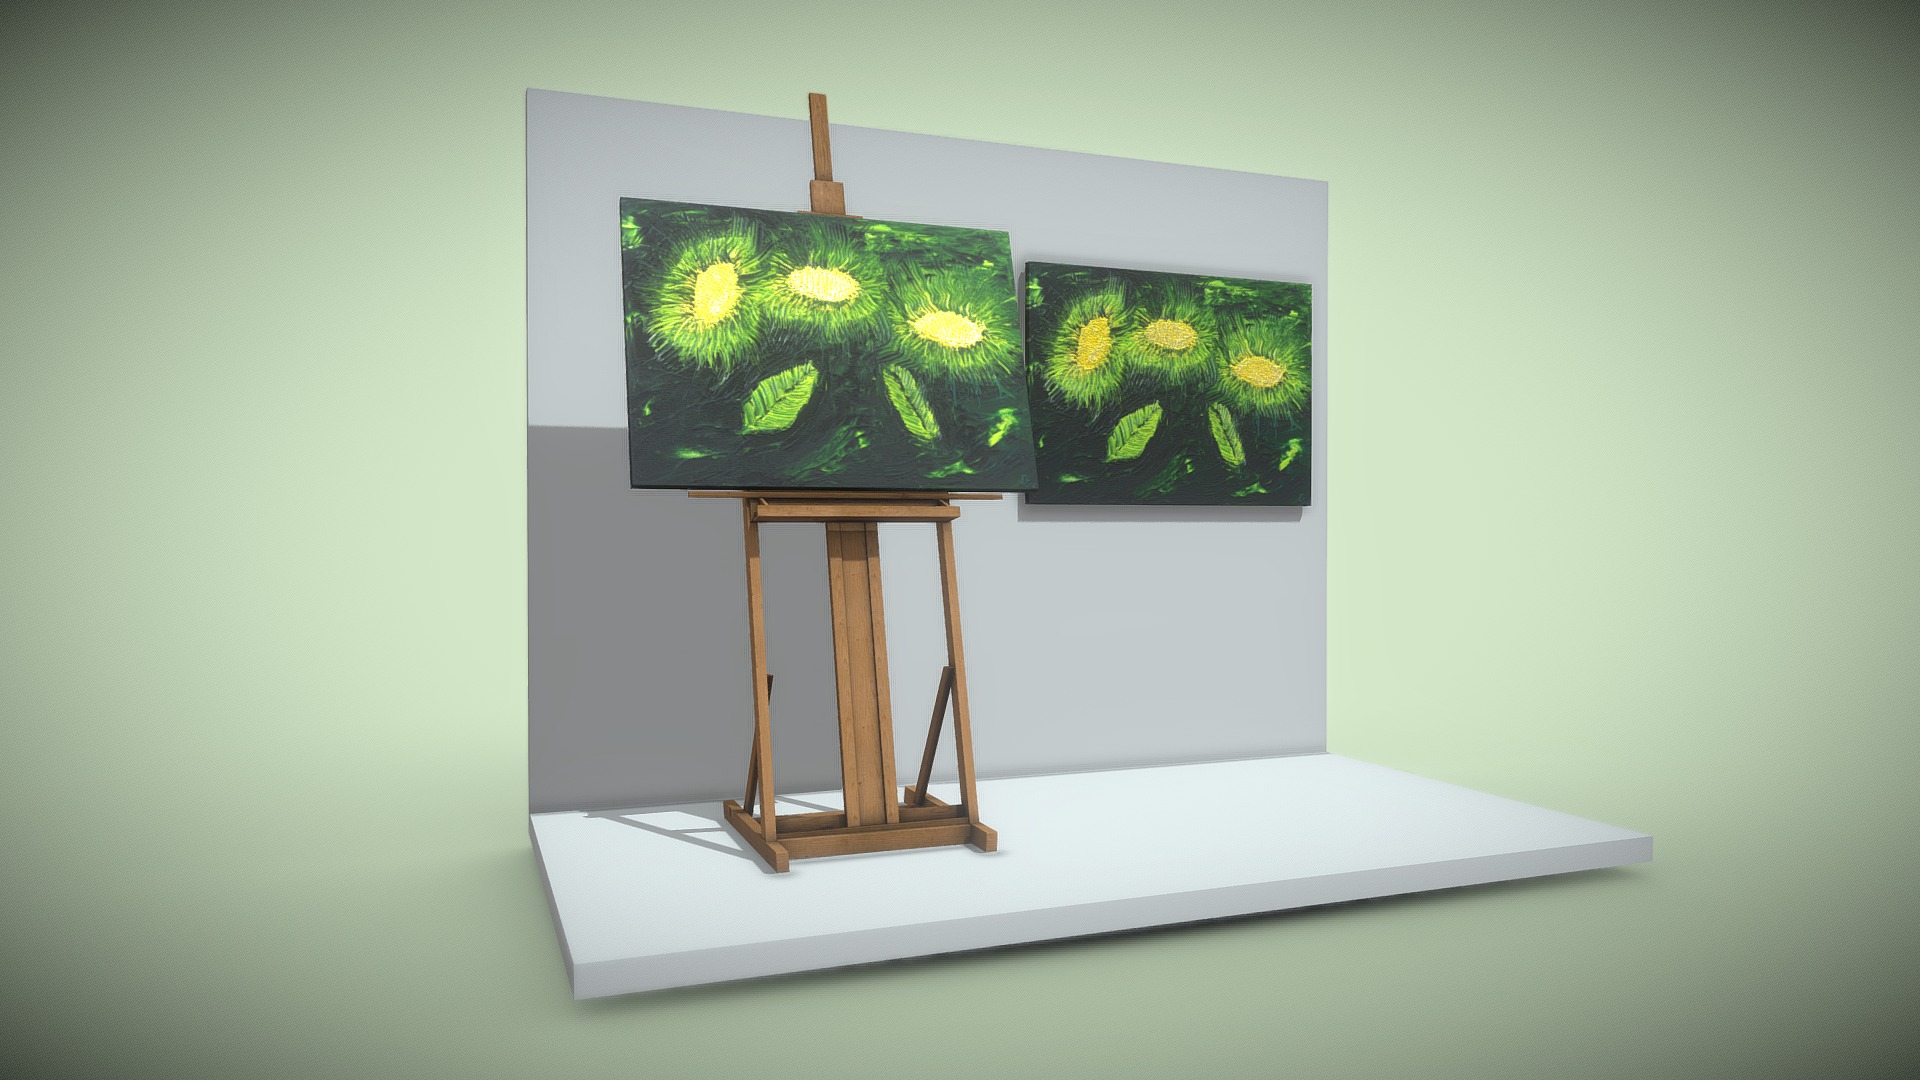 3D model Three Flowers – Oil Painting - This is a 3D model of the Three Flowers - Oil Painting. The 3D model is about a painting on a stand.